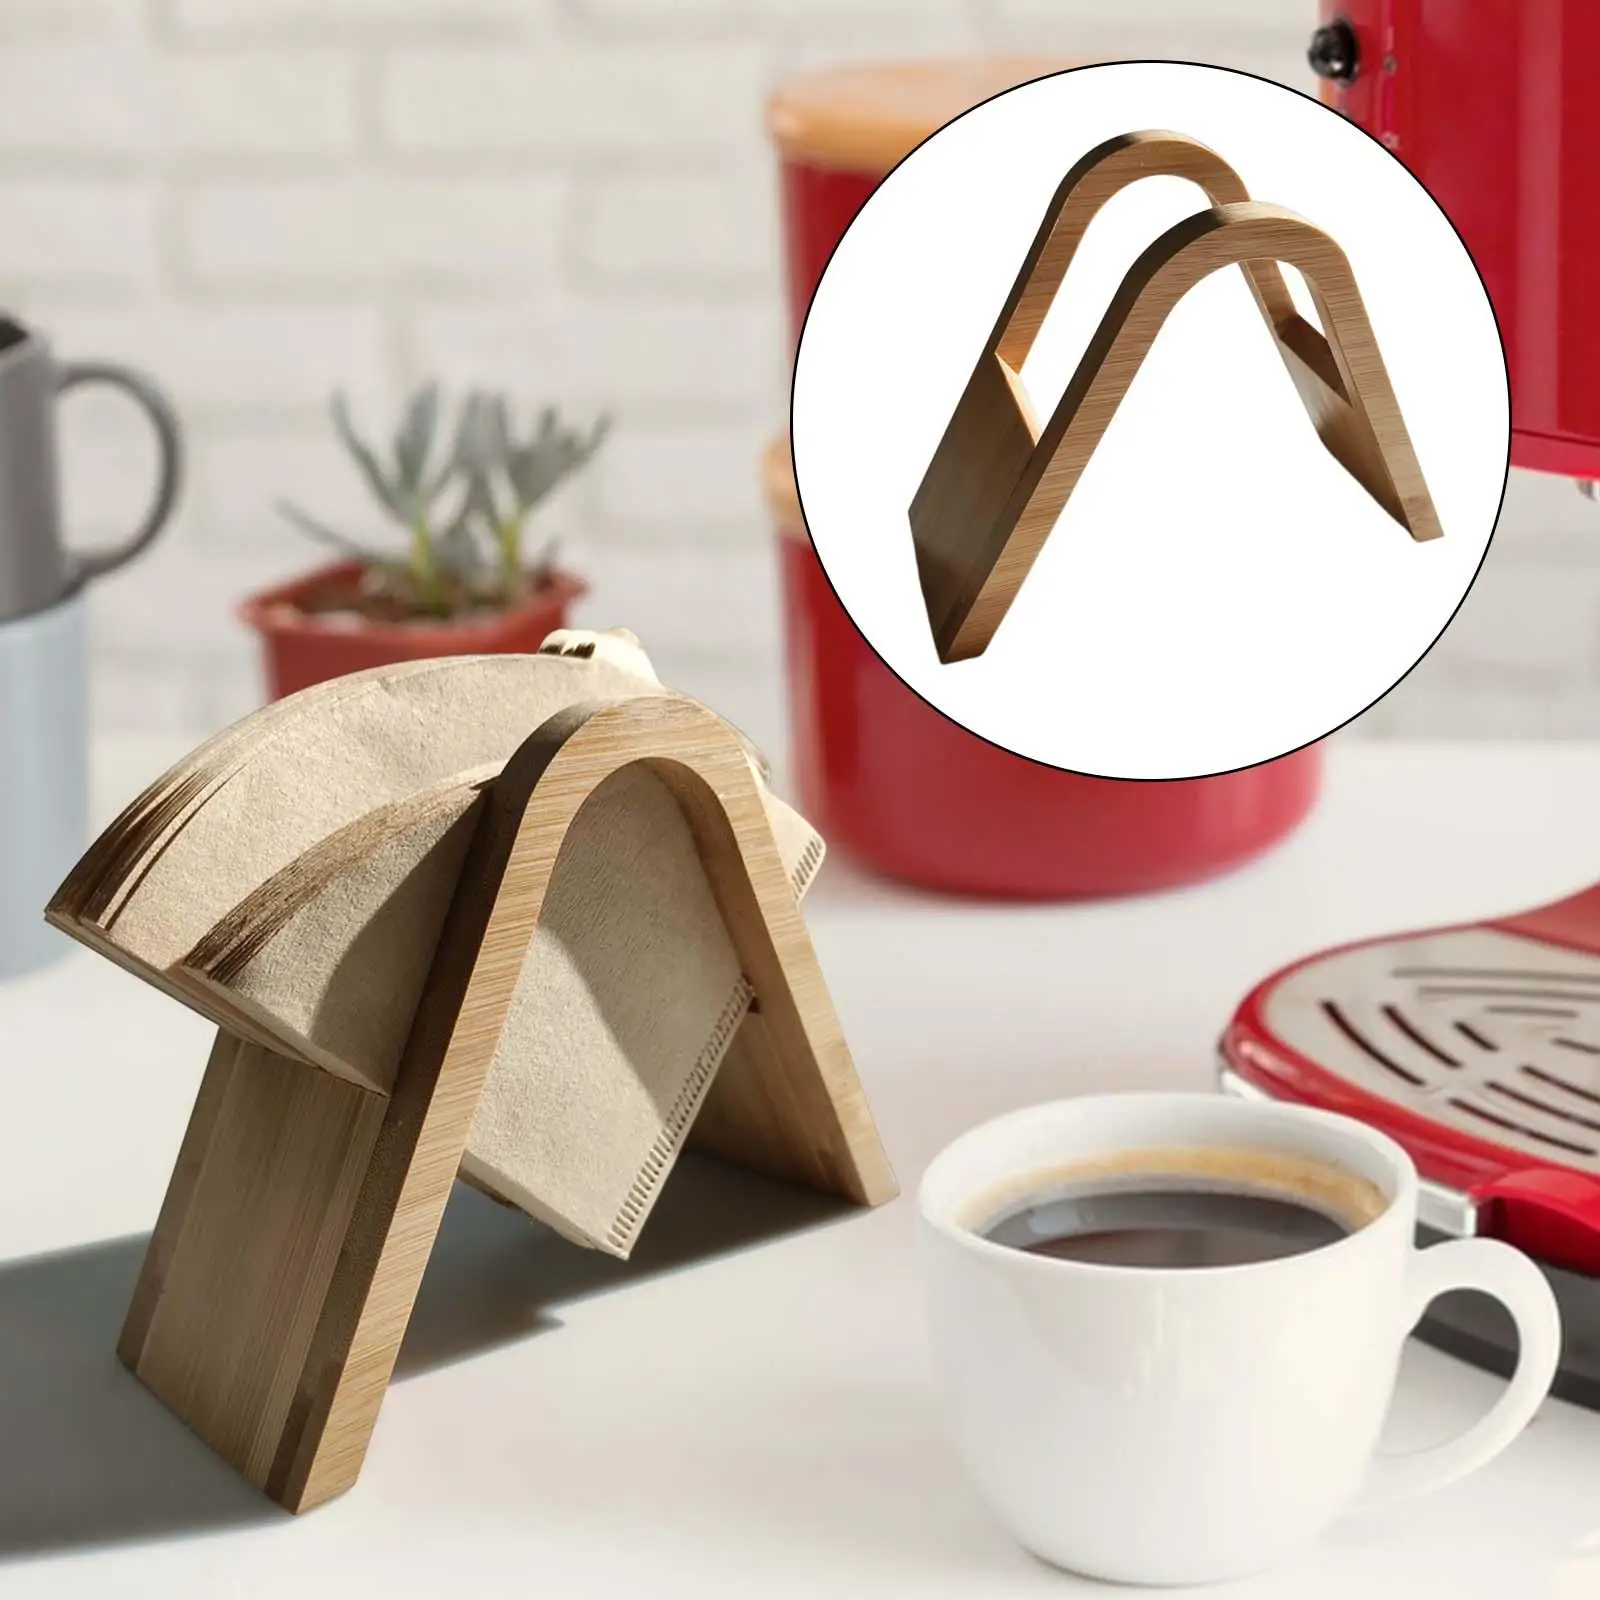 Fan Shaped Coffee Paper Storage Rack Standing Design Bamboo for Kitchen Home